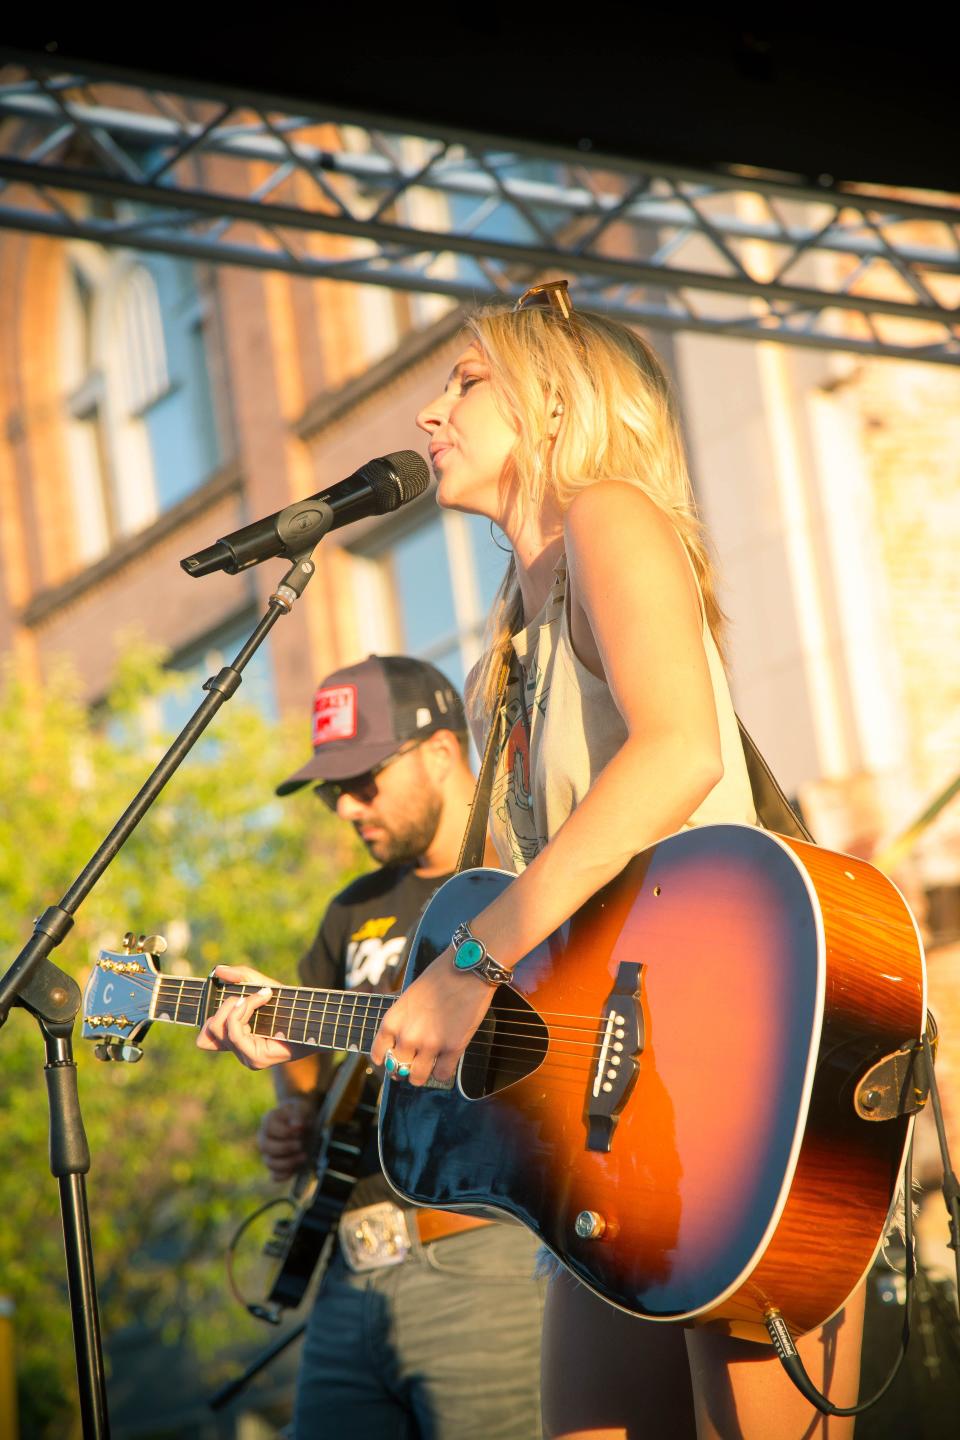 Country music artist Claudia Hoyser performed for the third concert this year as part of the annual summer concert series. The series is a joint venture of the City of Coshocton and Our Town Coshocton.